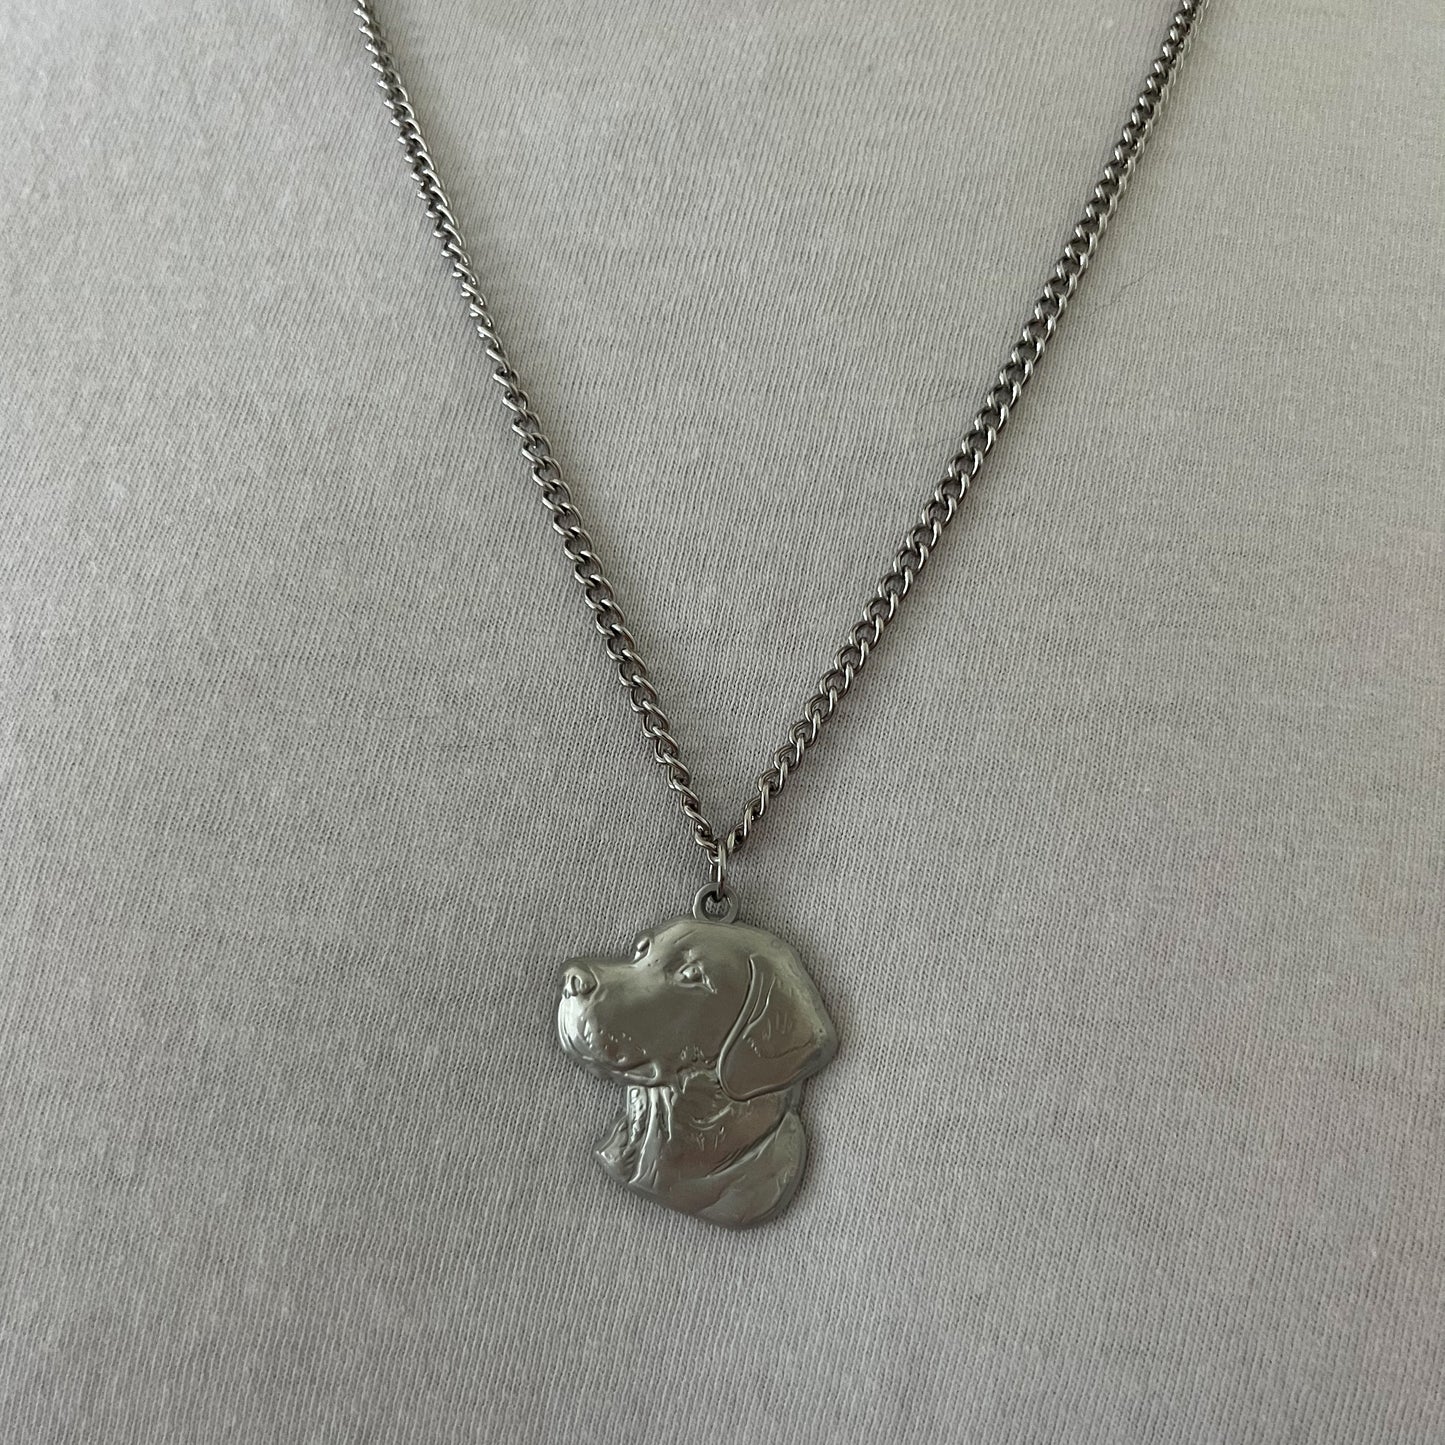 Good Ol' Boy - Stainless Steel Necklace